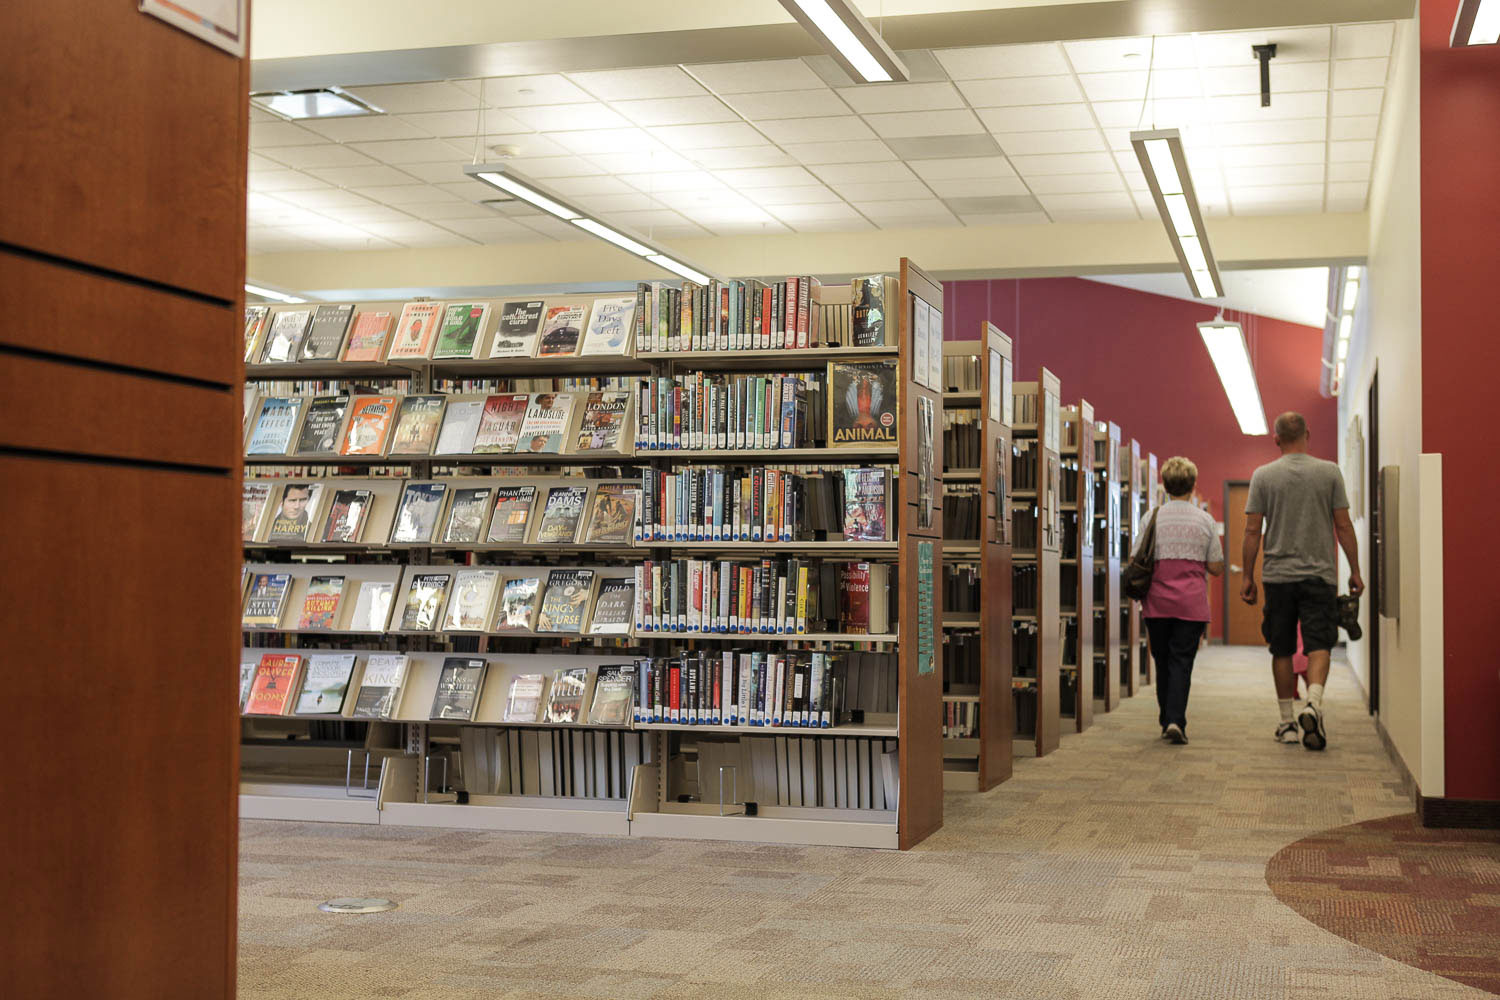 Library Storage - cantilever shelving with custom end panels at Uintah County Library